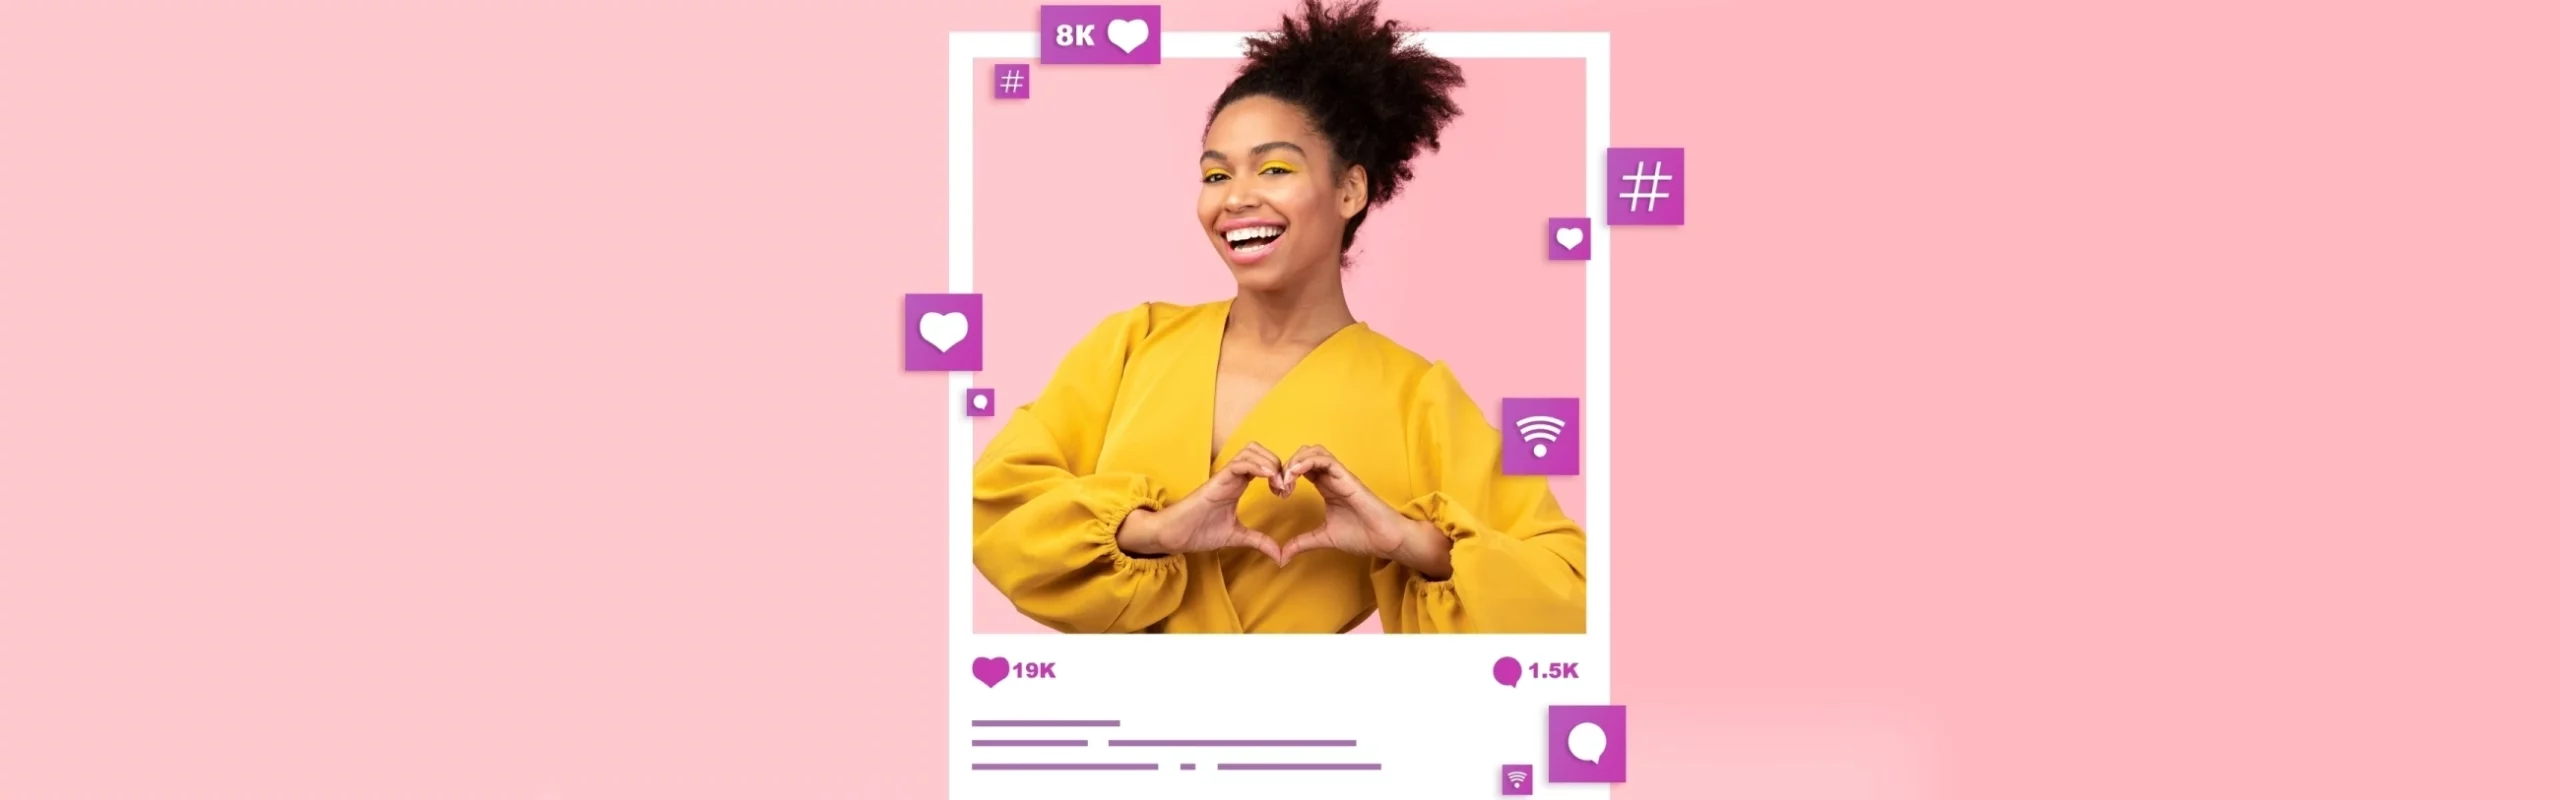 Nano Influencers, Female Influencer forming a heart with her hands, standing within a frame that looks like a posting